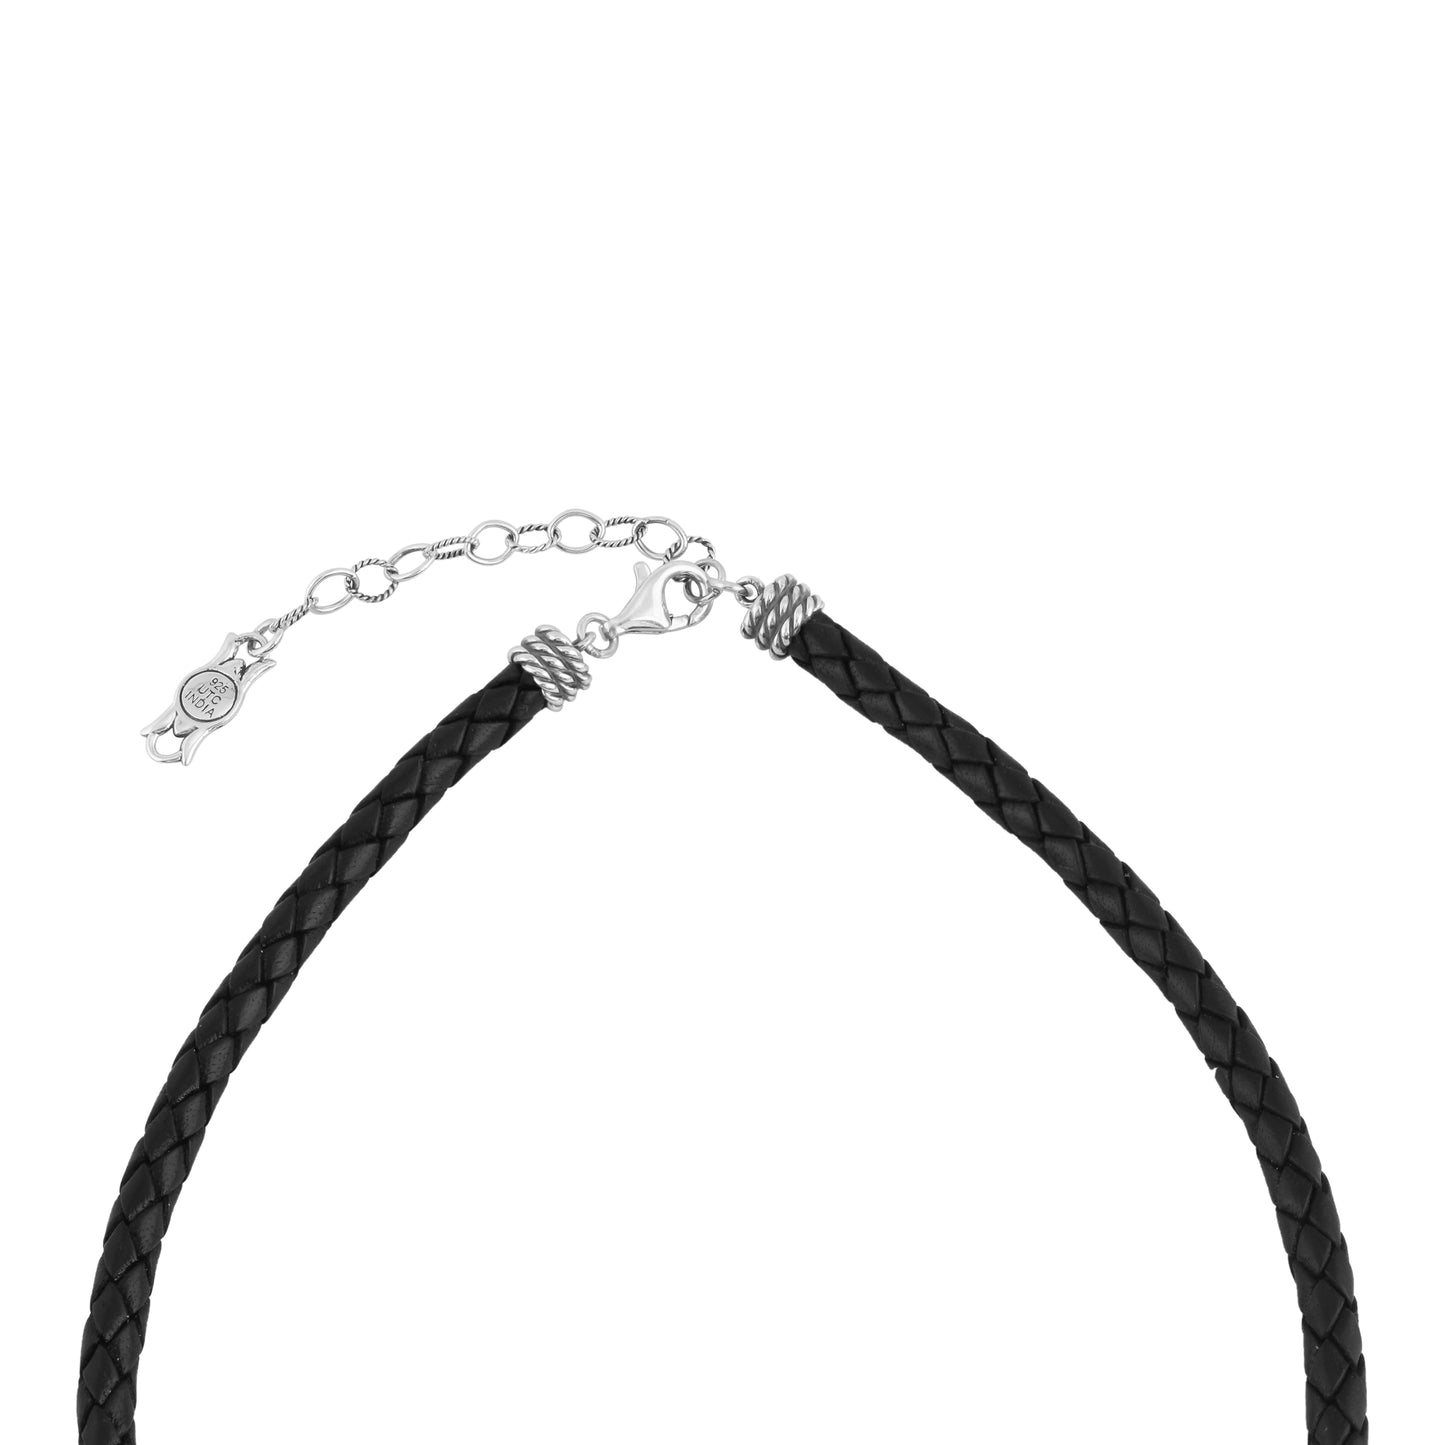 Braided Black Genuine Leather Sterling Silver Necklace, 17 -20 Inches